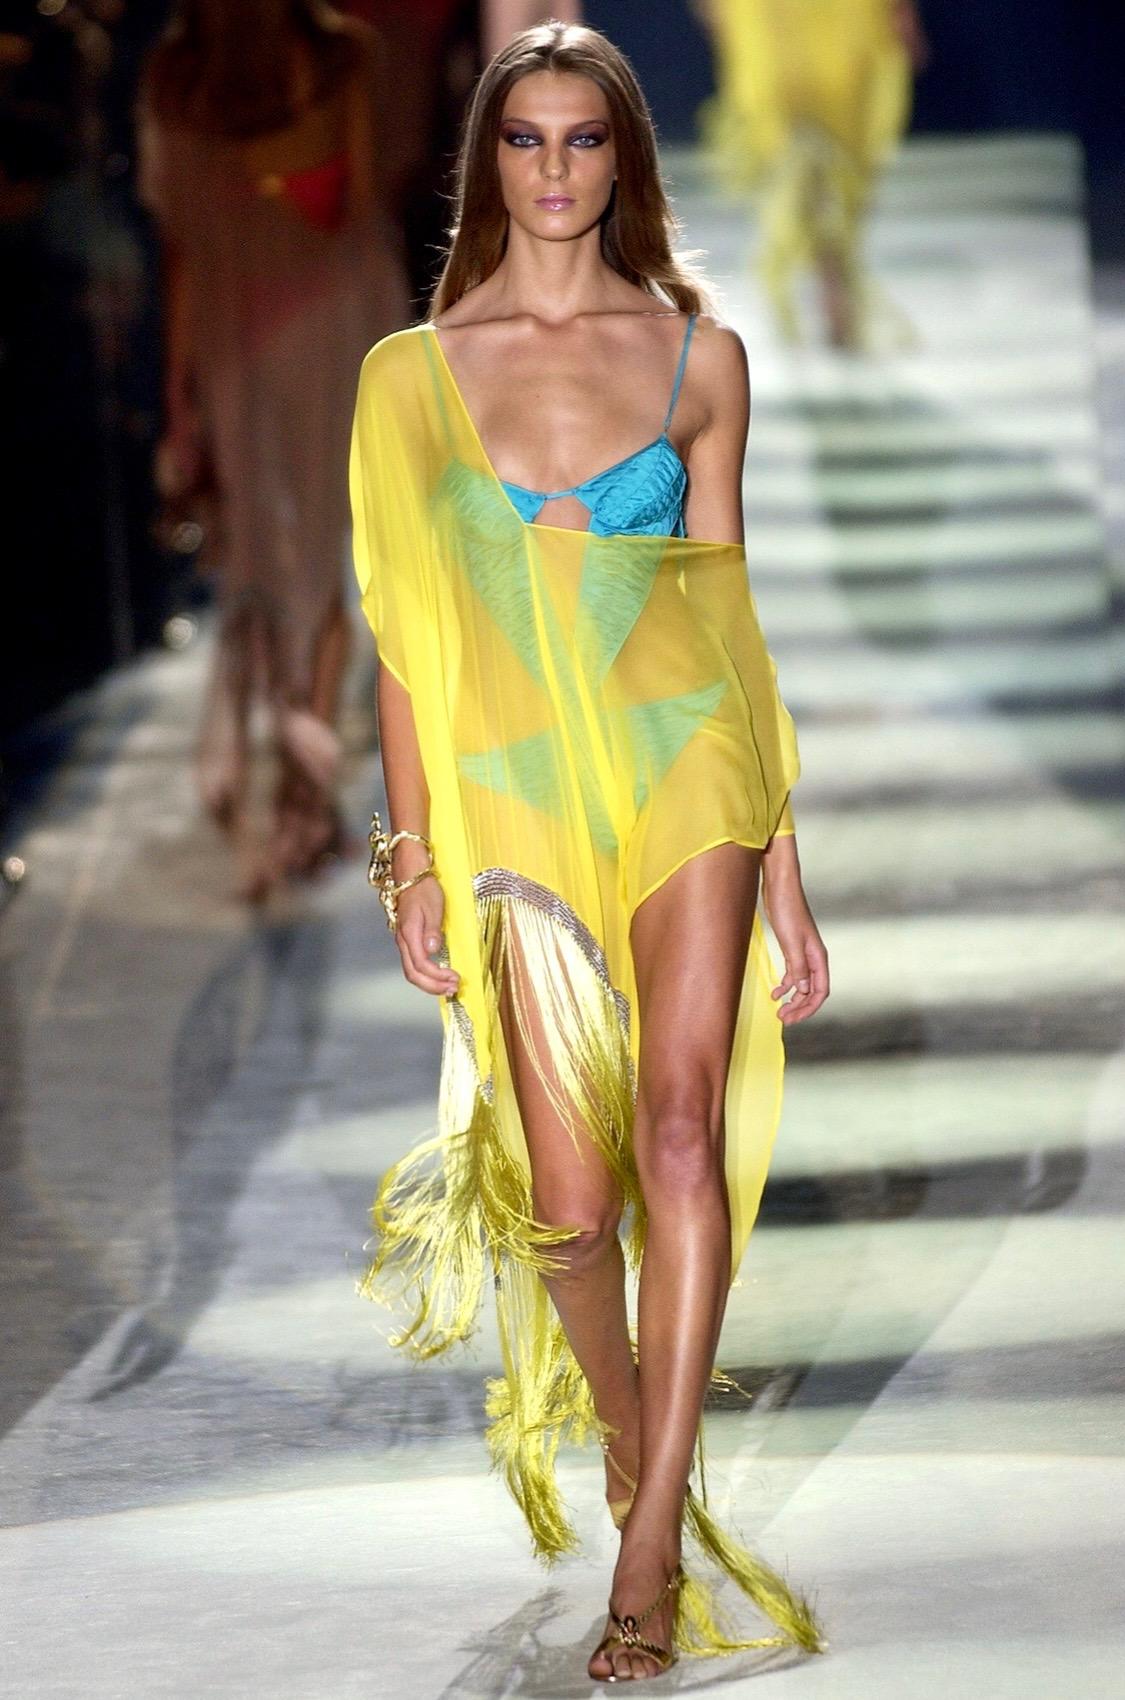 Presenting a bright yellow sheer Gucci cover-up, designed by Tom Ford. From the Spring/Summer 2004 collection this kaftan appeared on the runway as part of look number 24 on Daria Werbowy. Constructed primarily of a sheer canary yellow silk, this